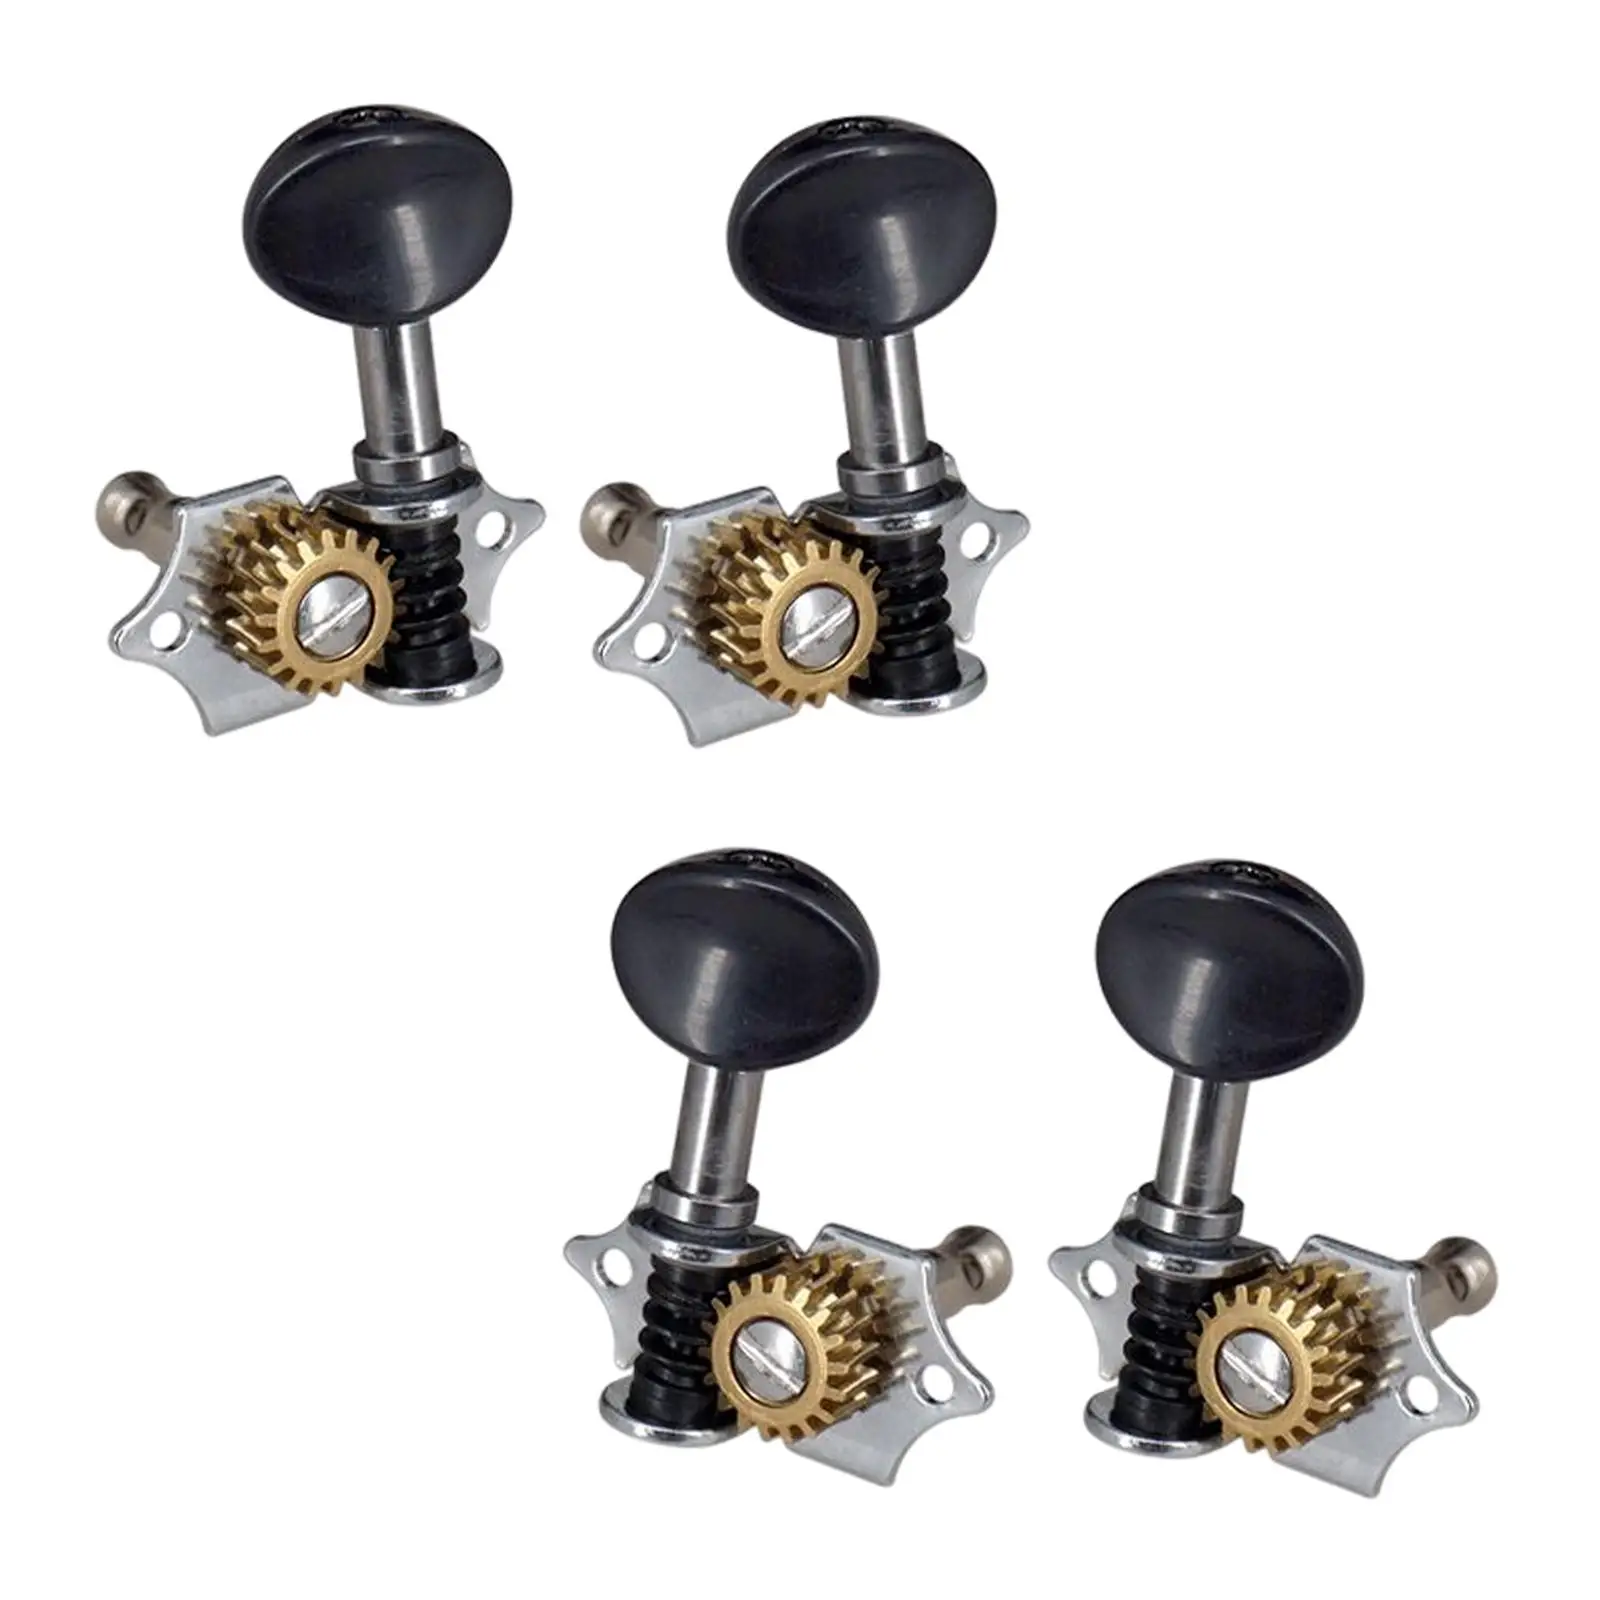 4 Pieces 1:18 Ukulele Tuning Pegs Ukulele DIY Parts Replaces Concave Button Instrument Supplies Steel Ukelele String